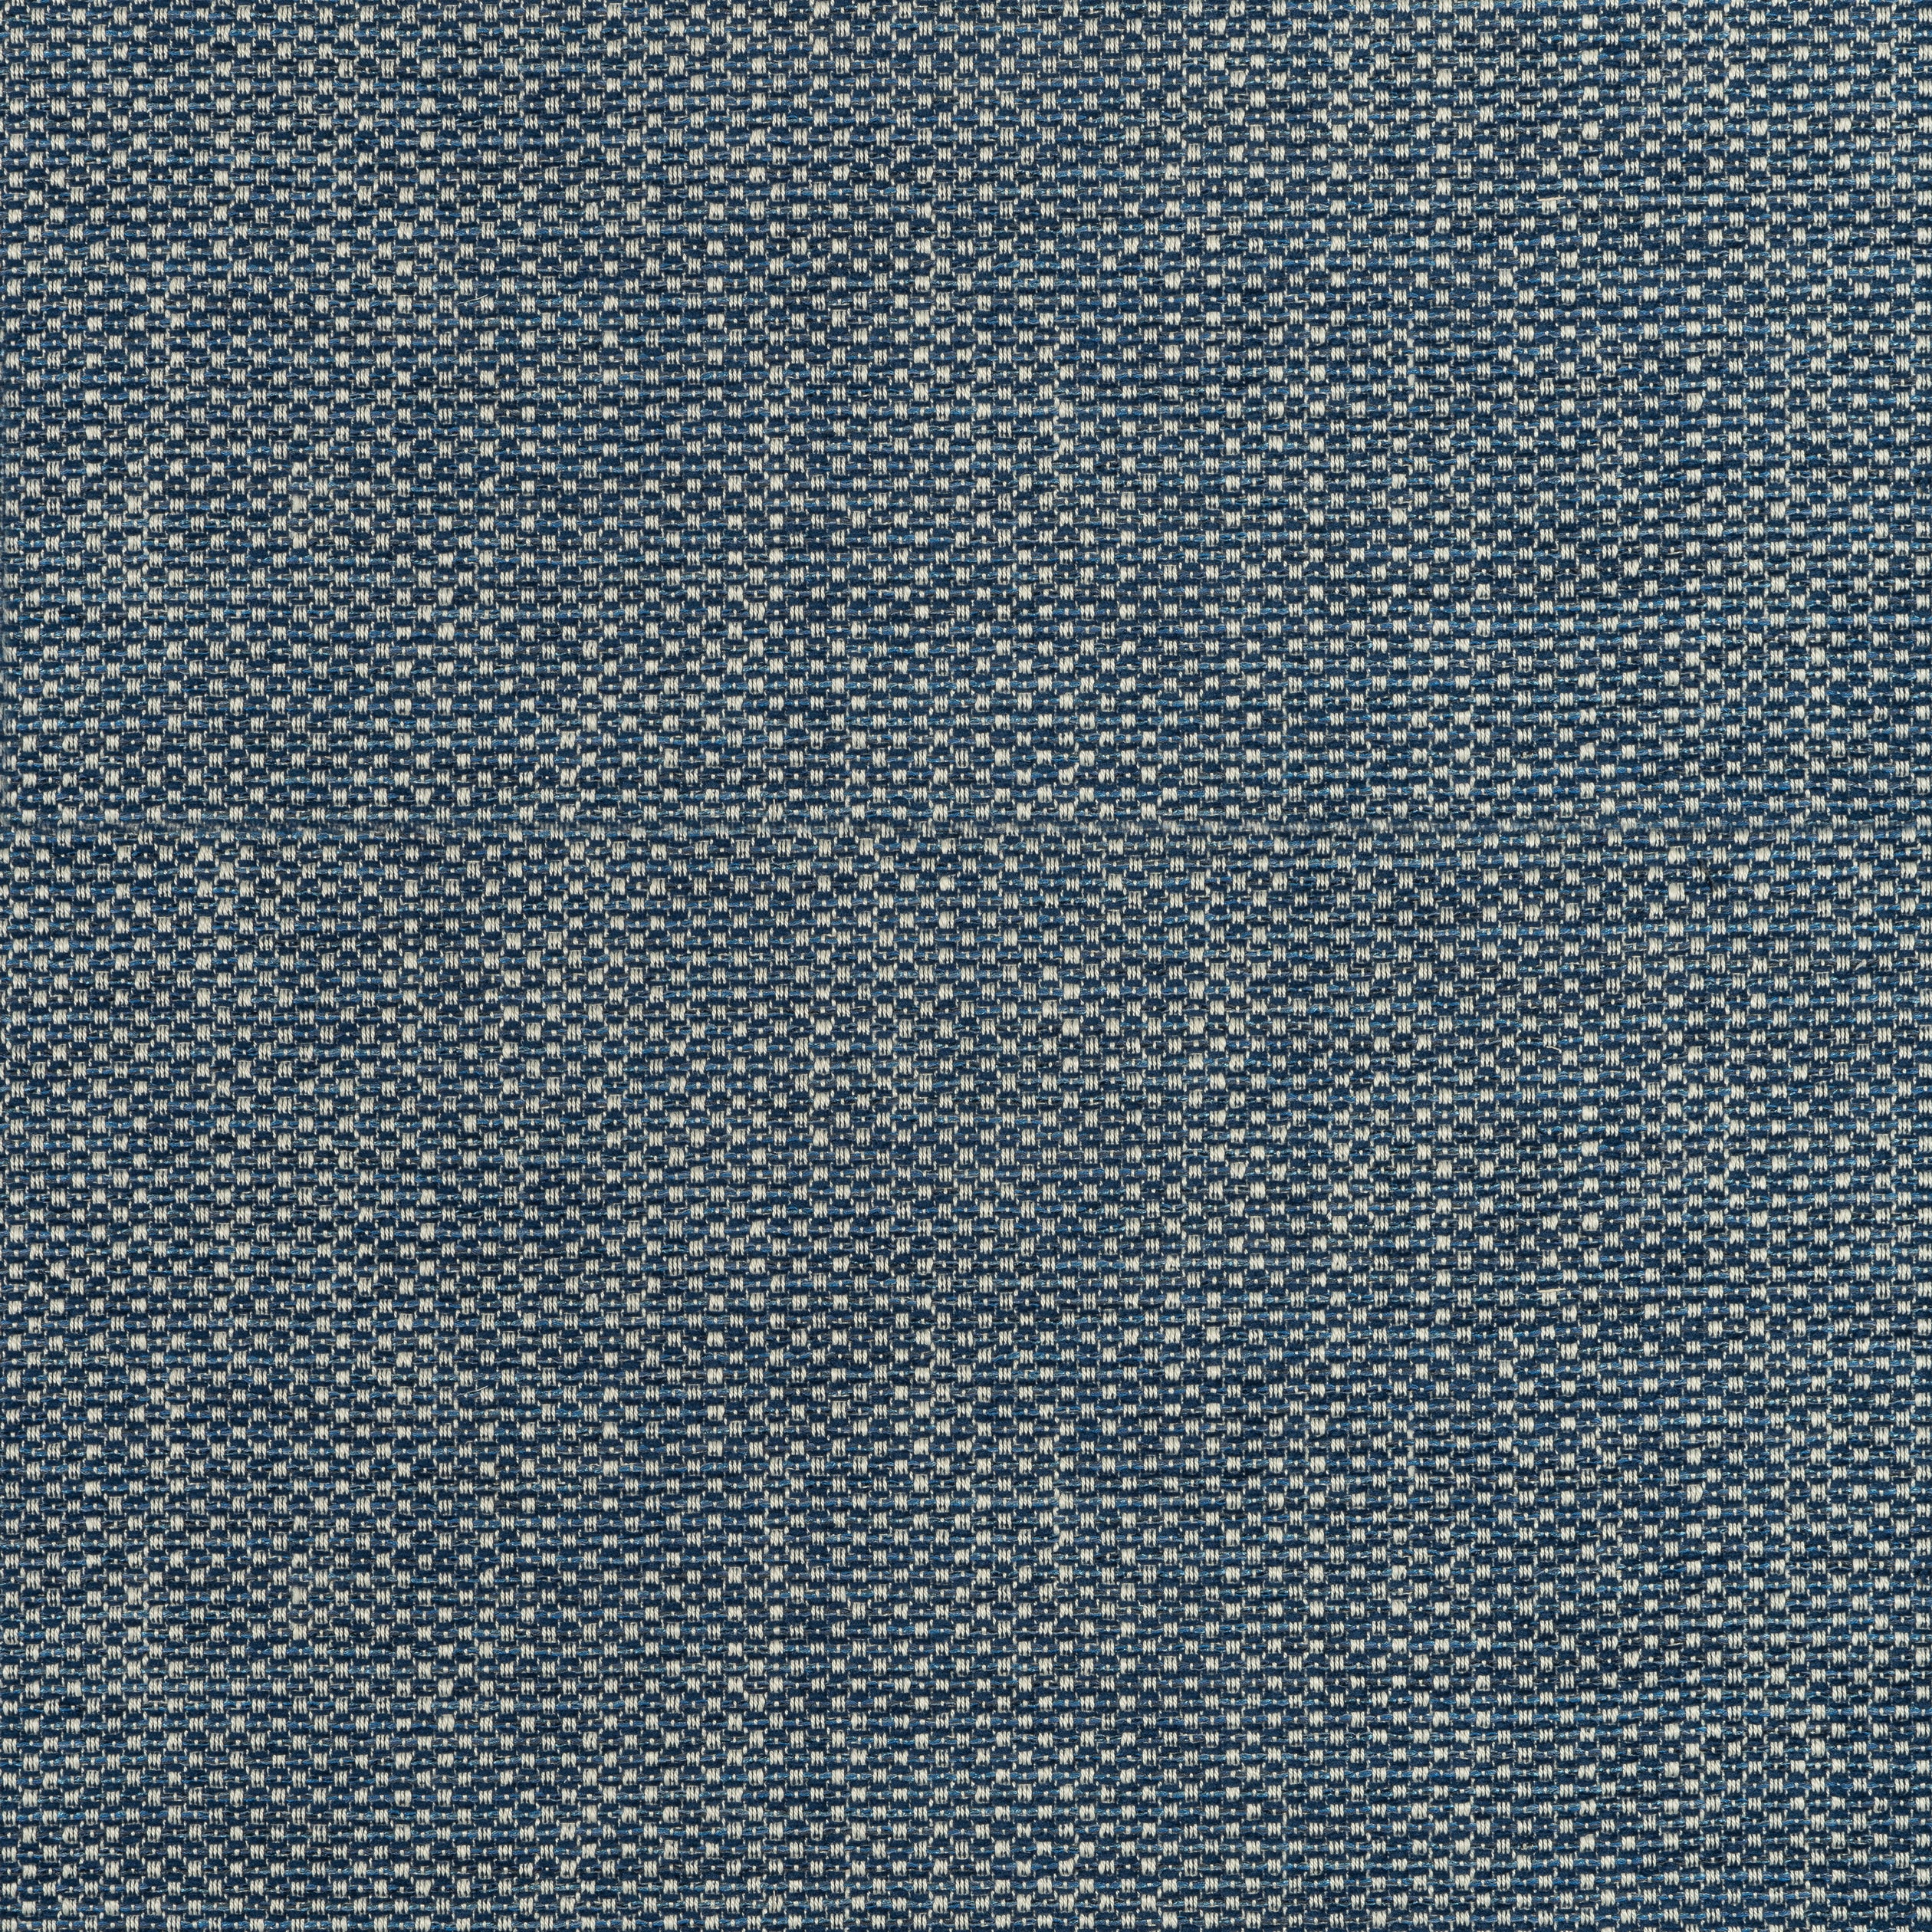 Cascade fabric in navy color - pattern number W75267 - by Thibaut in the Elements collection